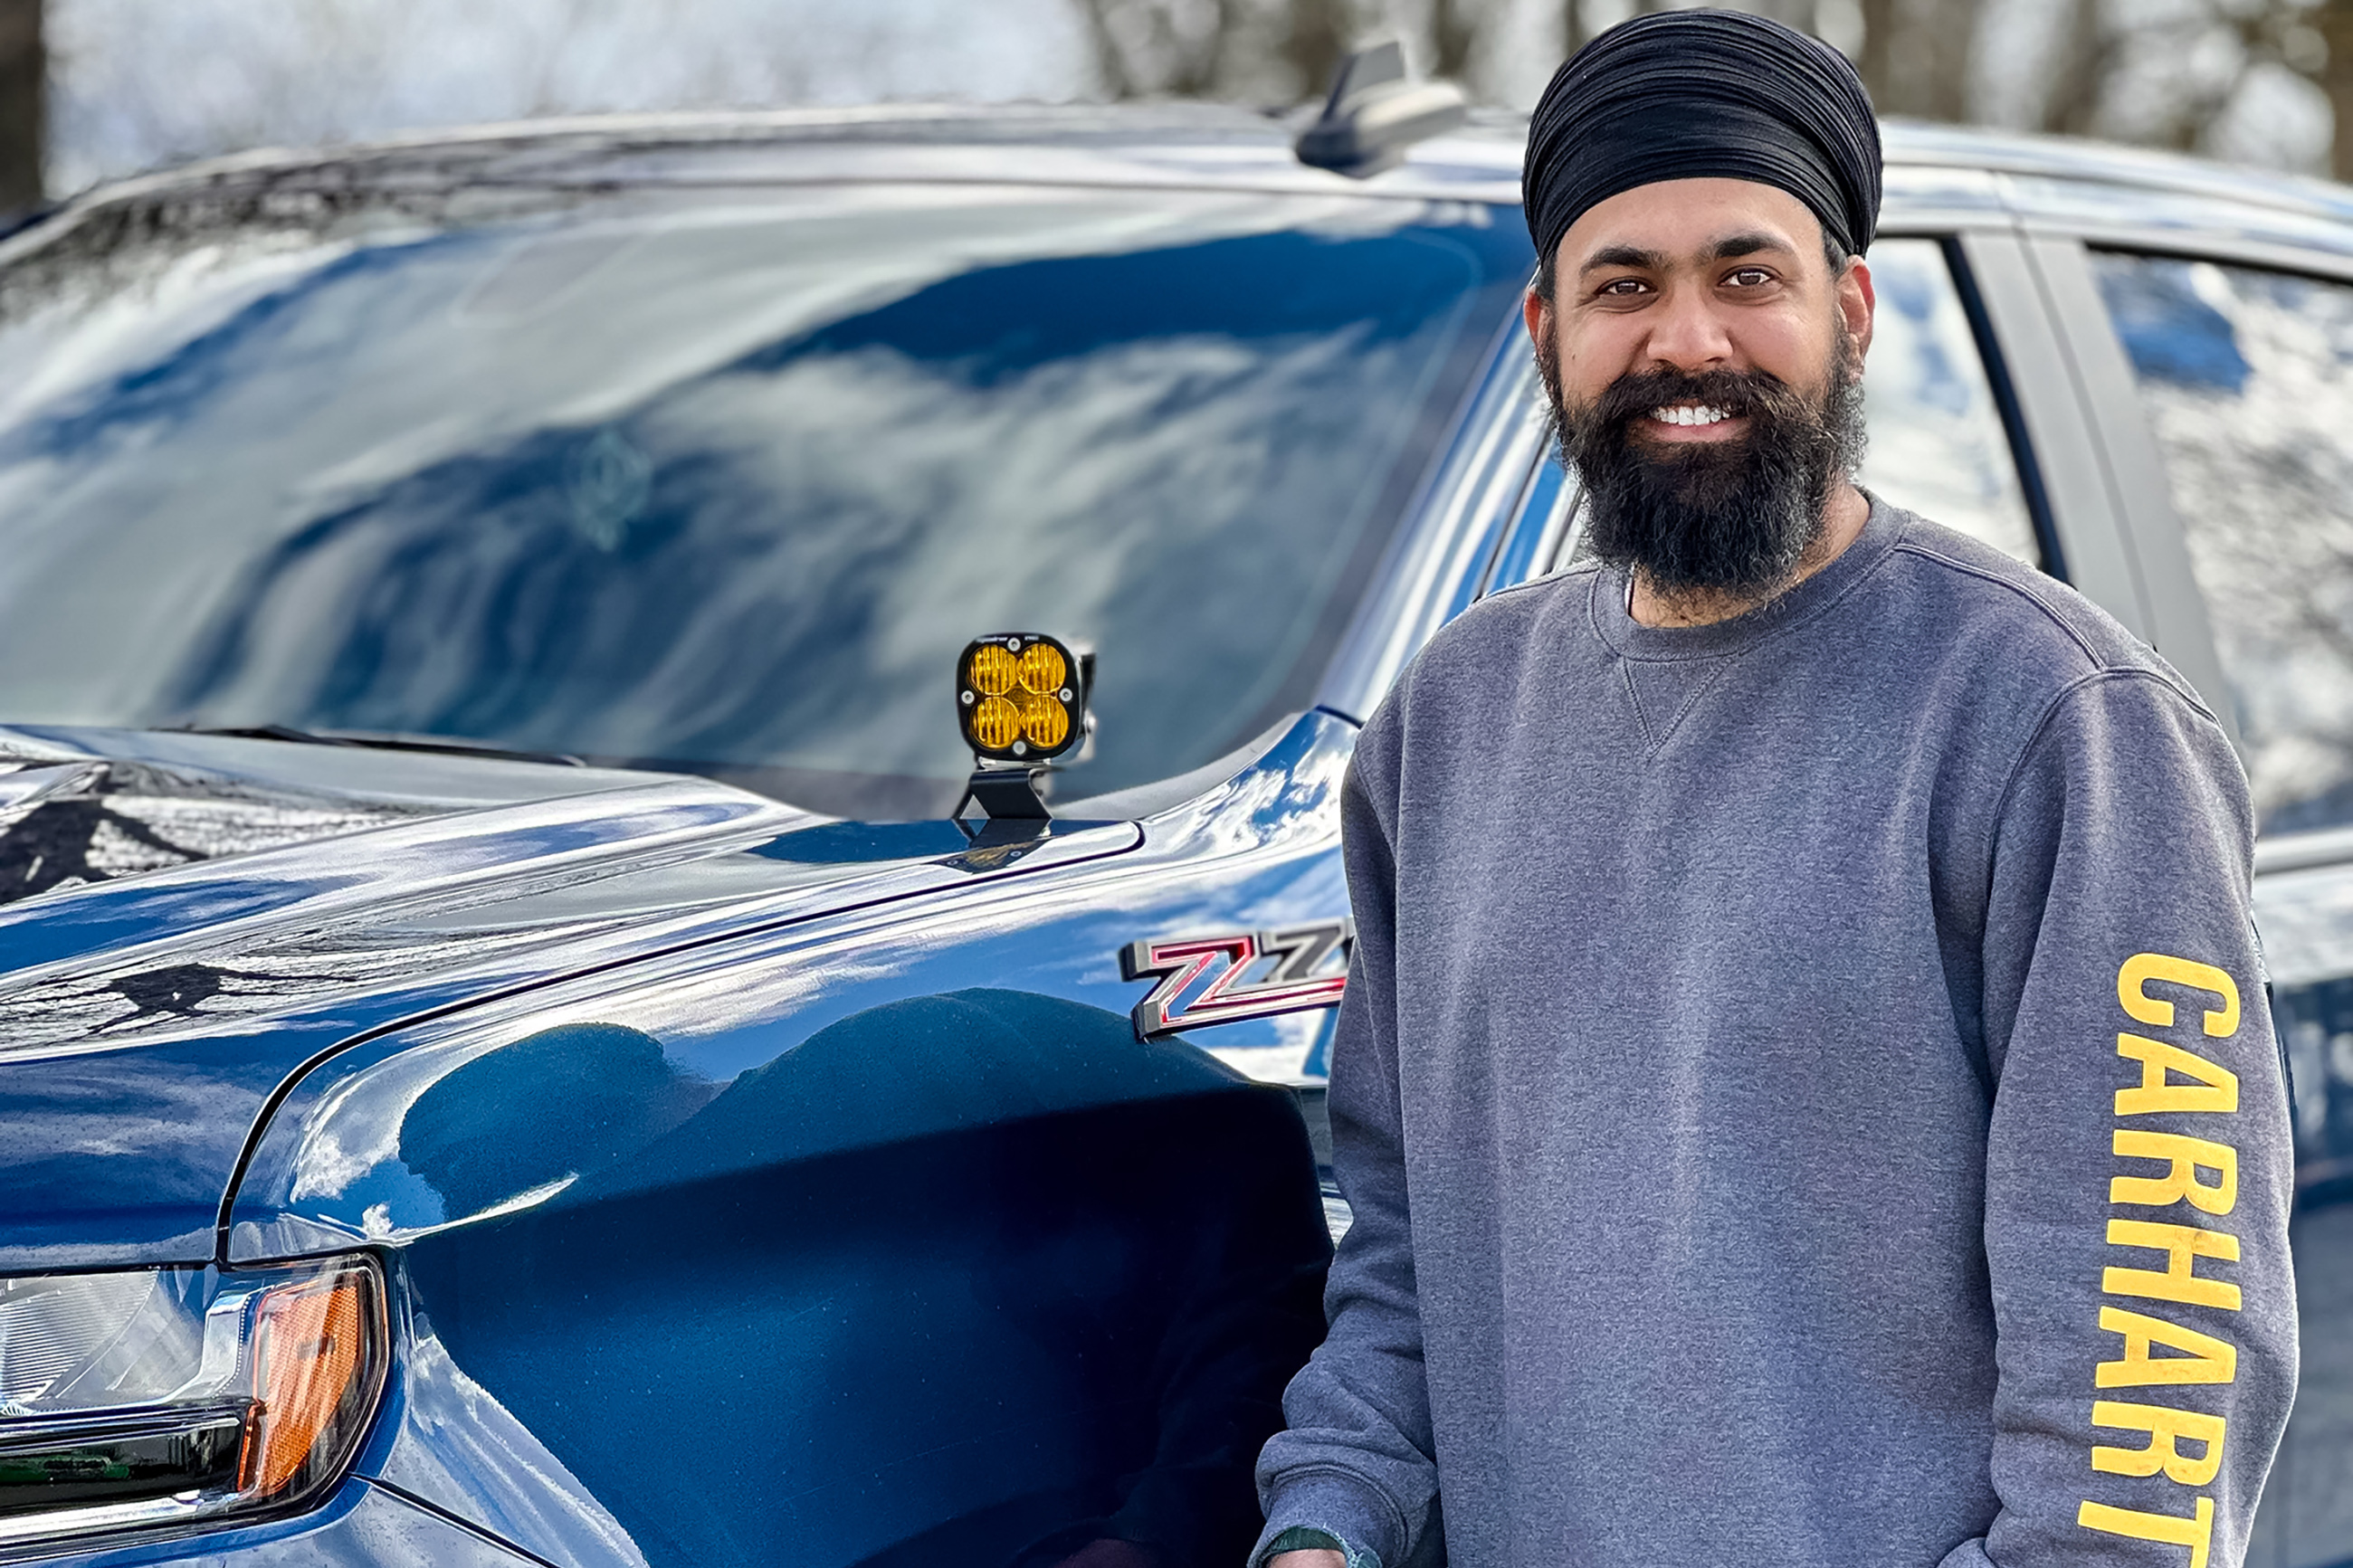 "My favorite thing to do outside is spend time with my daughter. Whether it be an outdoor adventure, playing at the park, working in the yard or washing the truck together, seeing her discover new things and experiencing new adventures is one of my greatest joys as a father." - Ickdeep Singh